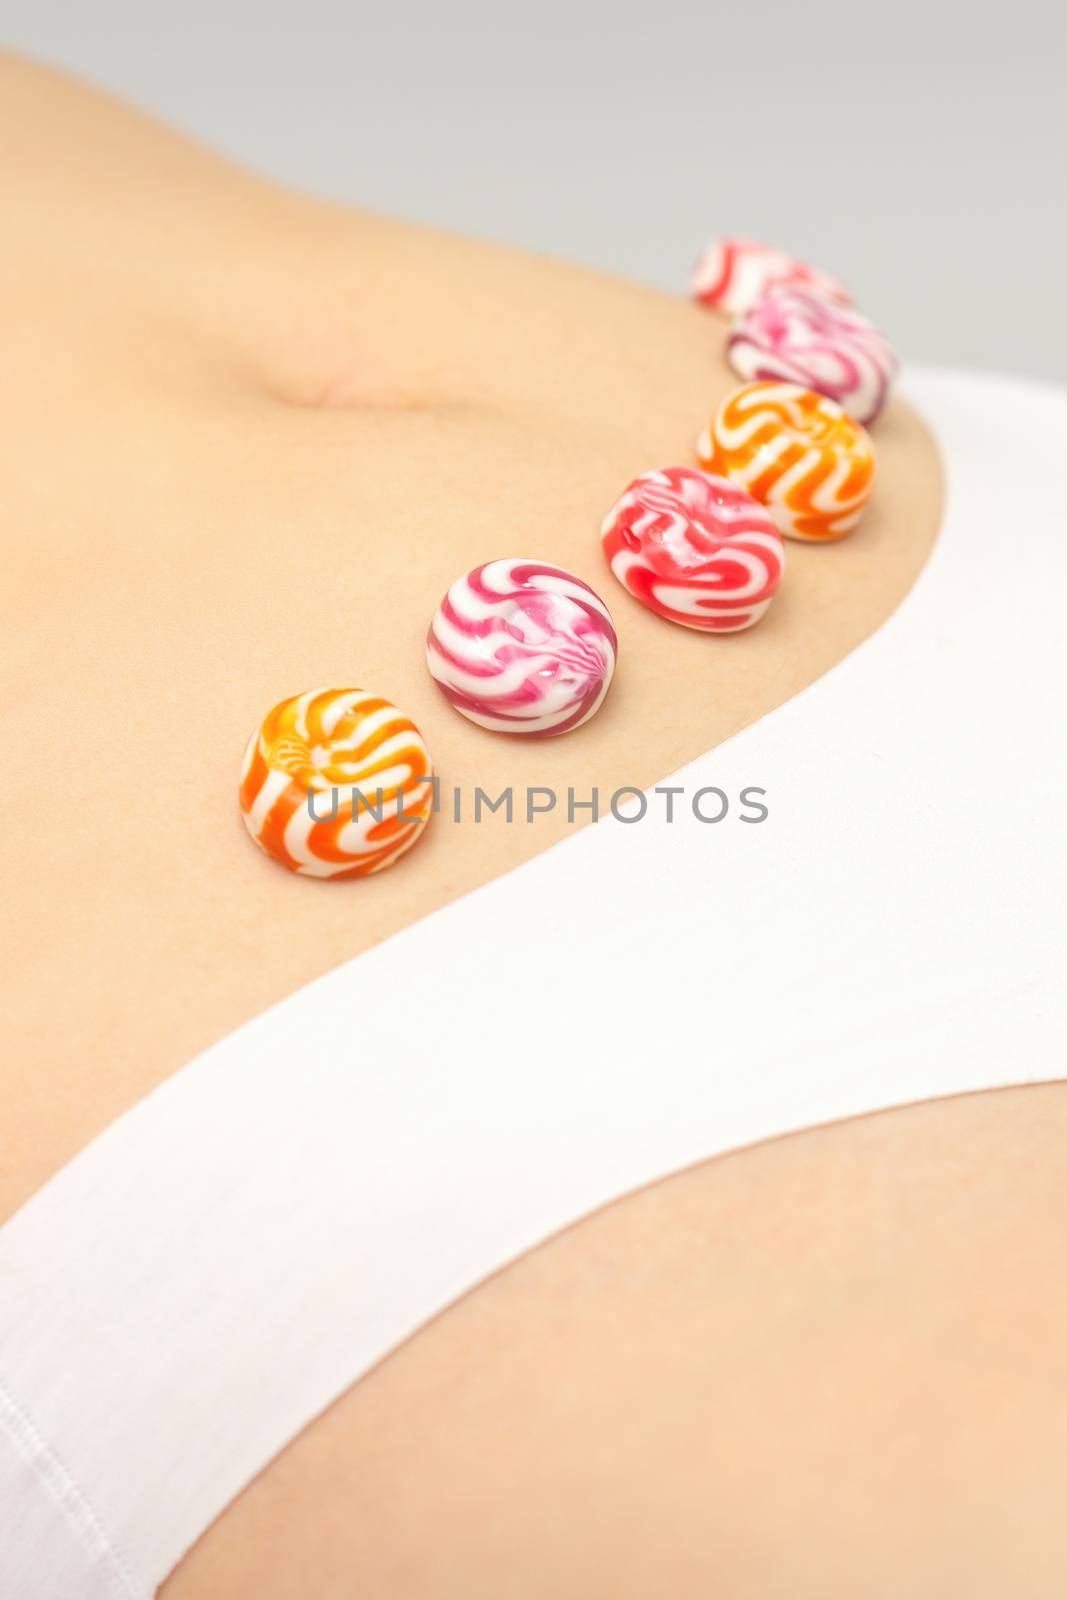 Concept of intimate depilation, intimate waxing, depilation. Round candies lying down in a row on the female bikini zone, intimate area, close up. by okskukuruza